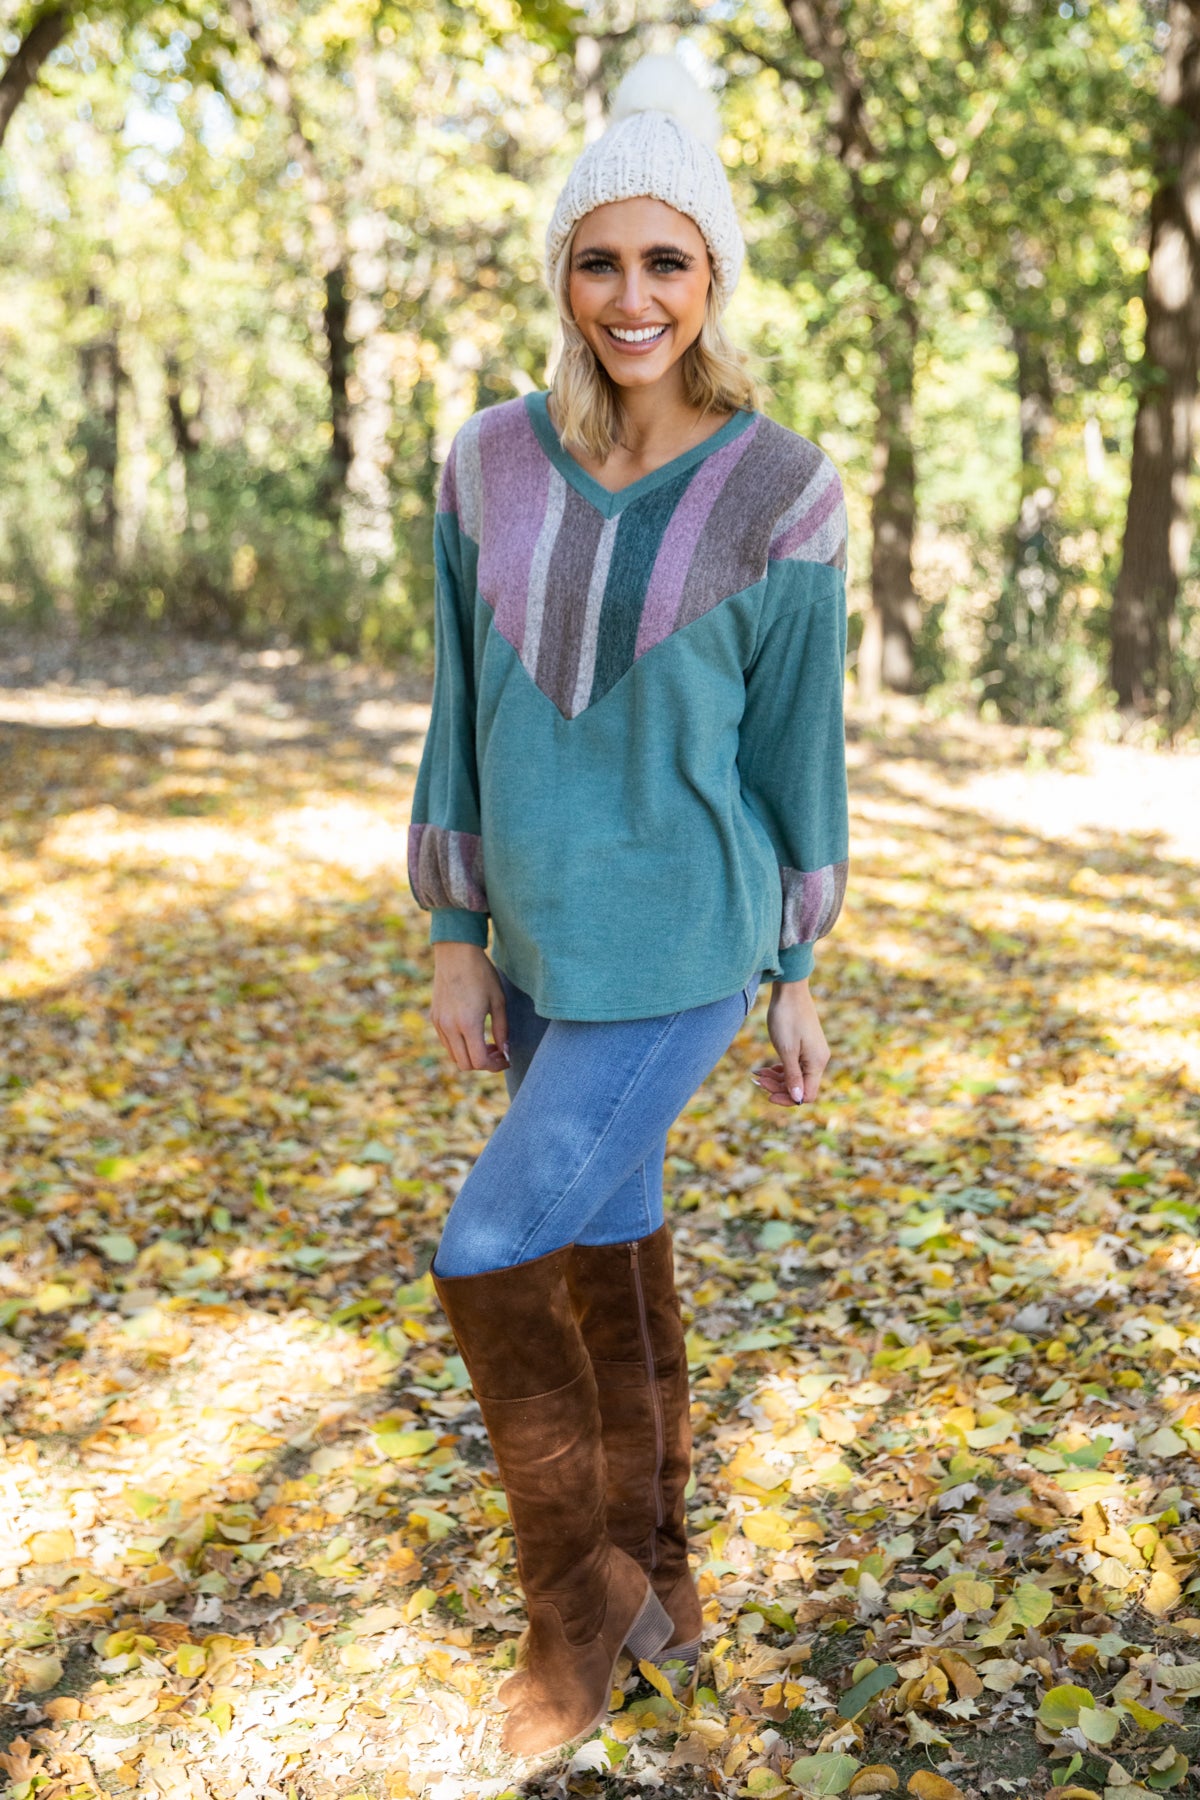 Emerald Green and Mauve Colorblock Chevron Top · Filly Flair